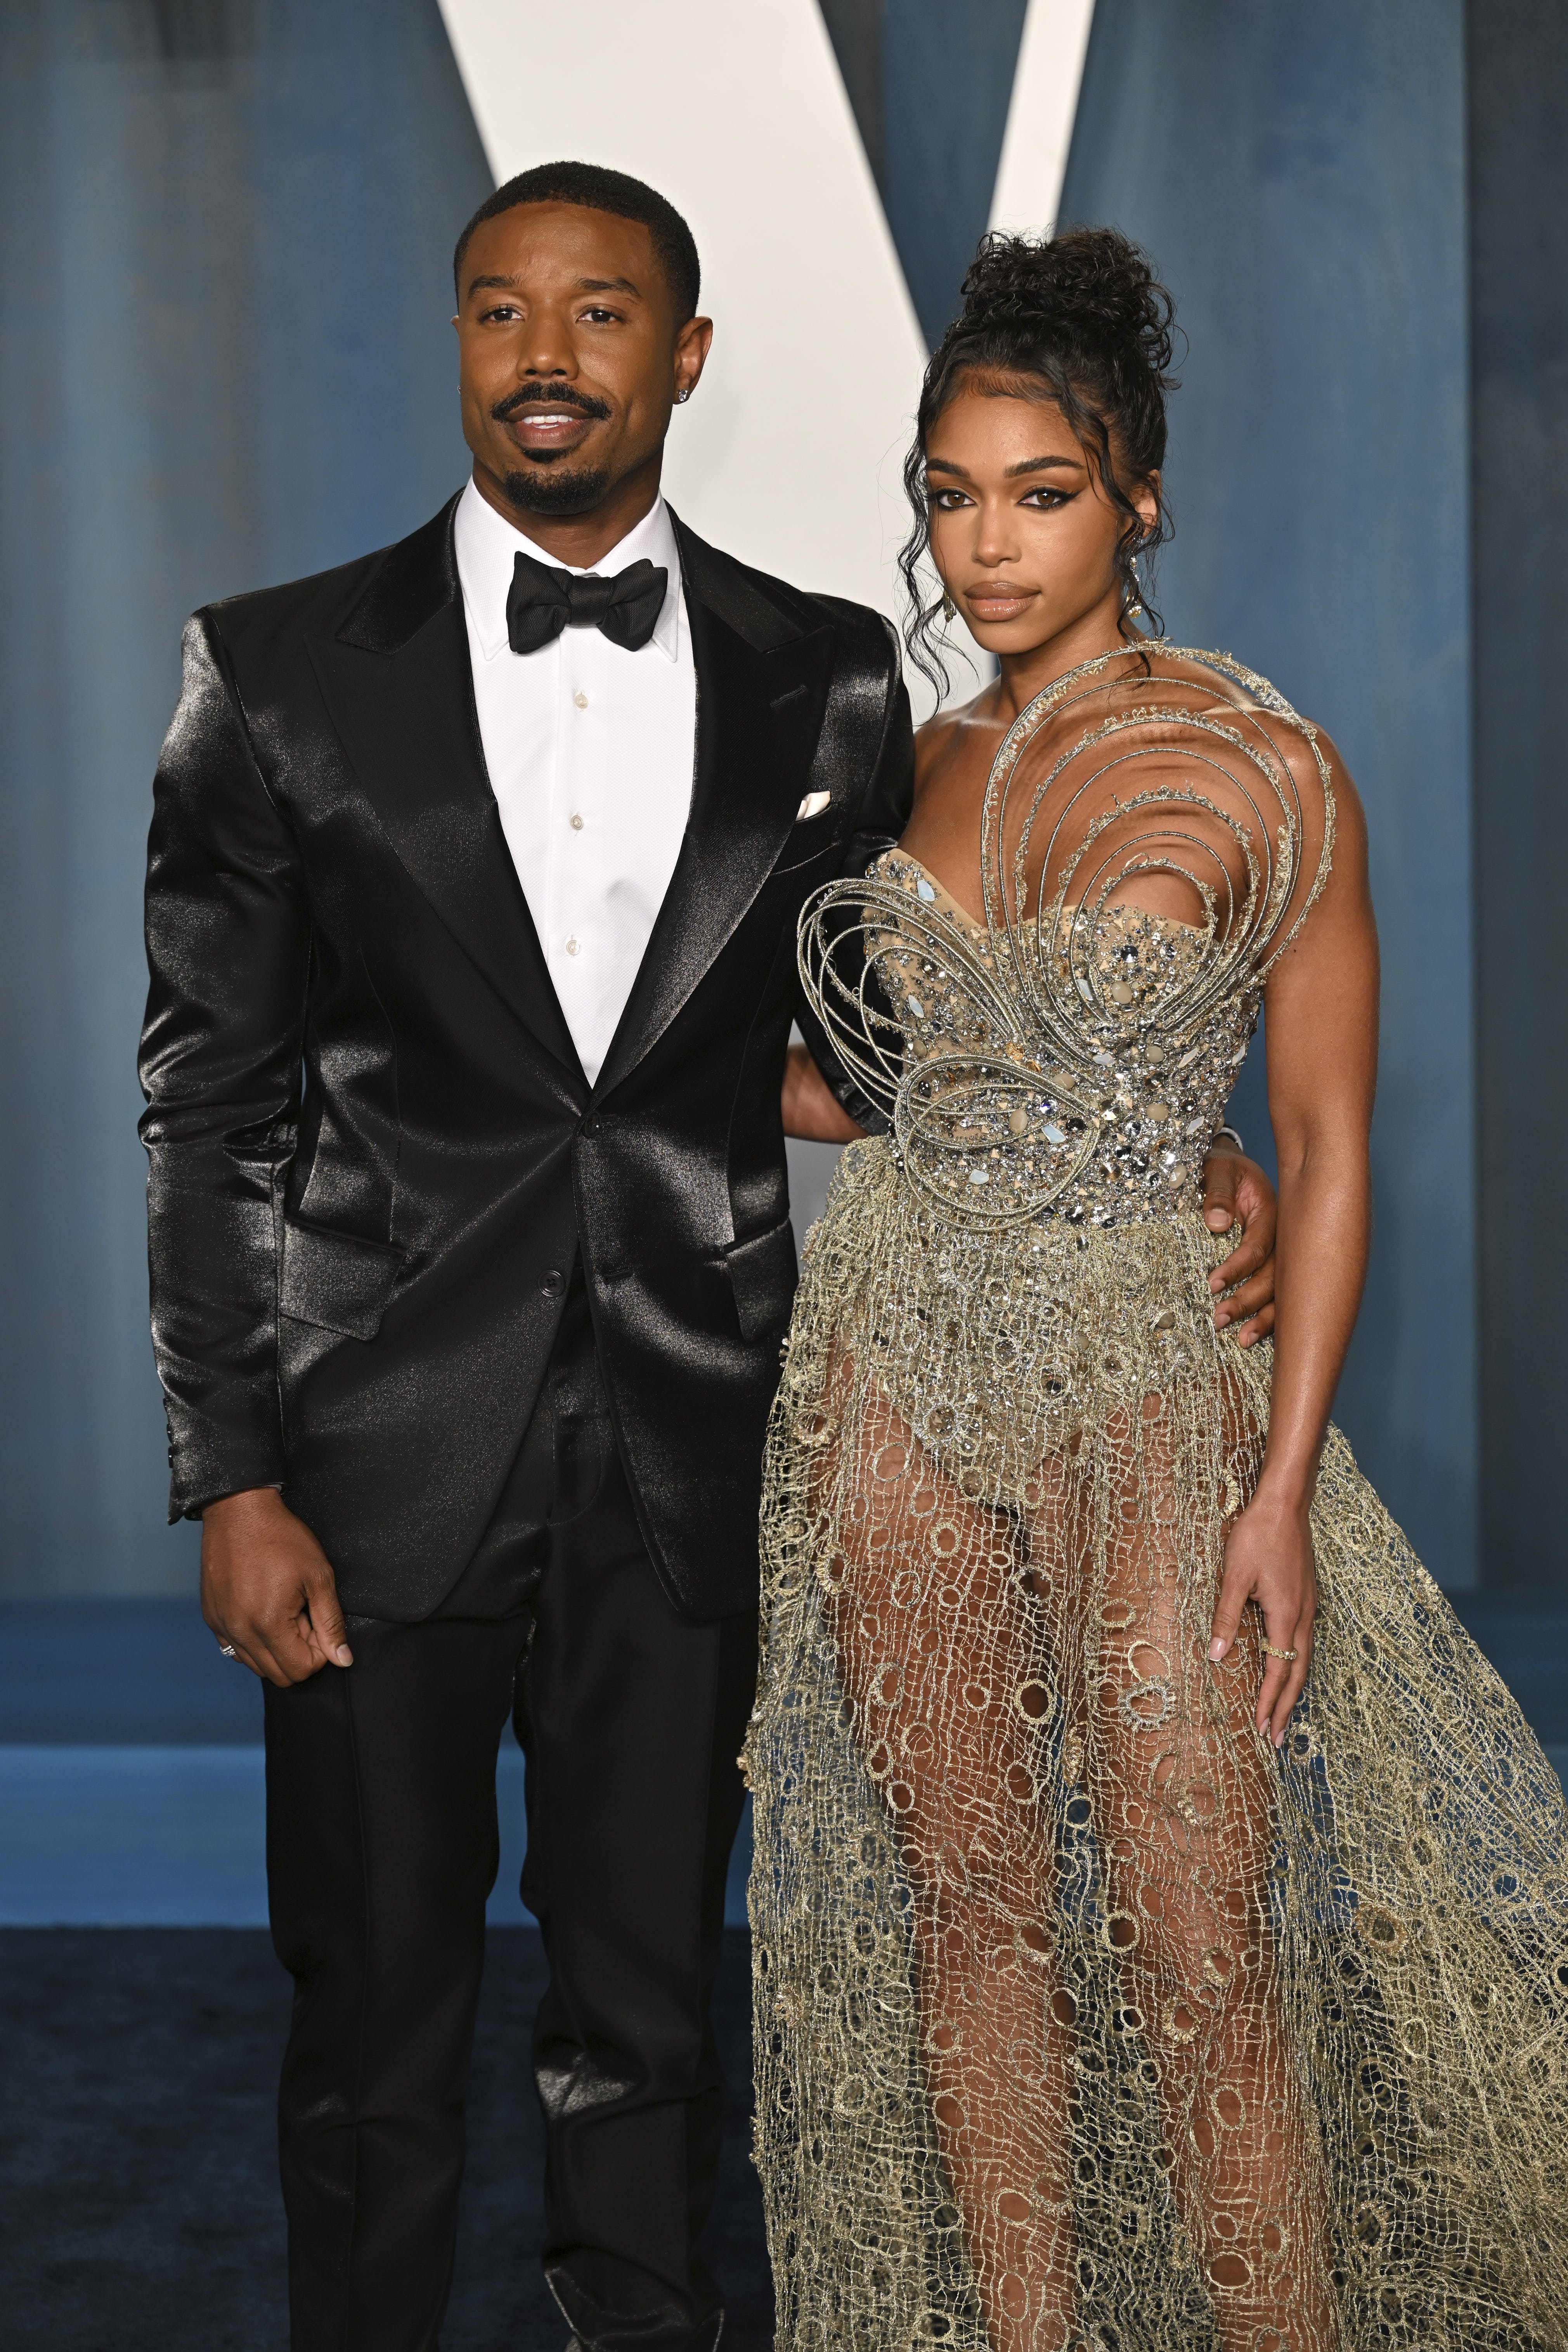 Michael B. Jordan and Lori Harvey attend the 2022 Vanity Fair Oscar Party hosted by Radhika Jones at Wallis Annenberg Center for the Performing Arts on March 27, 2022 in Beverly Hills, California. | Source: Getty Images